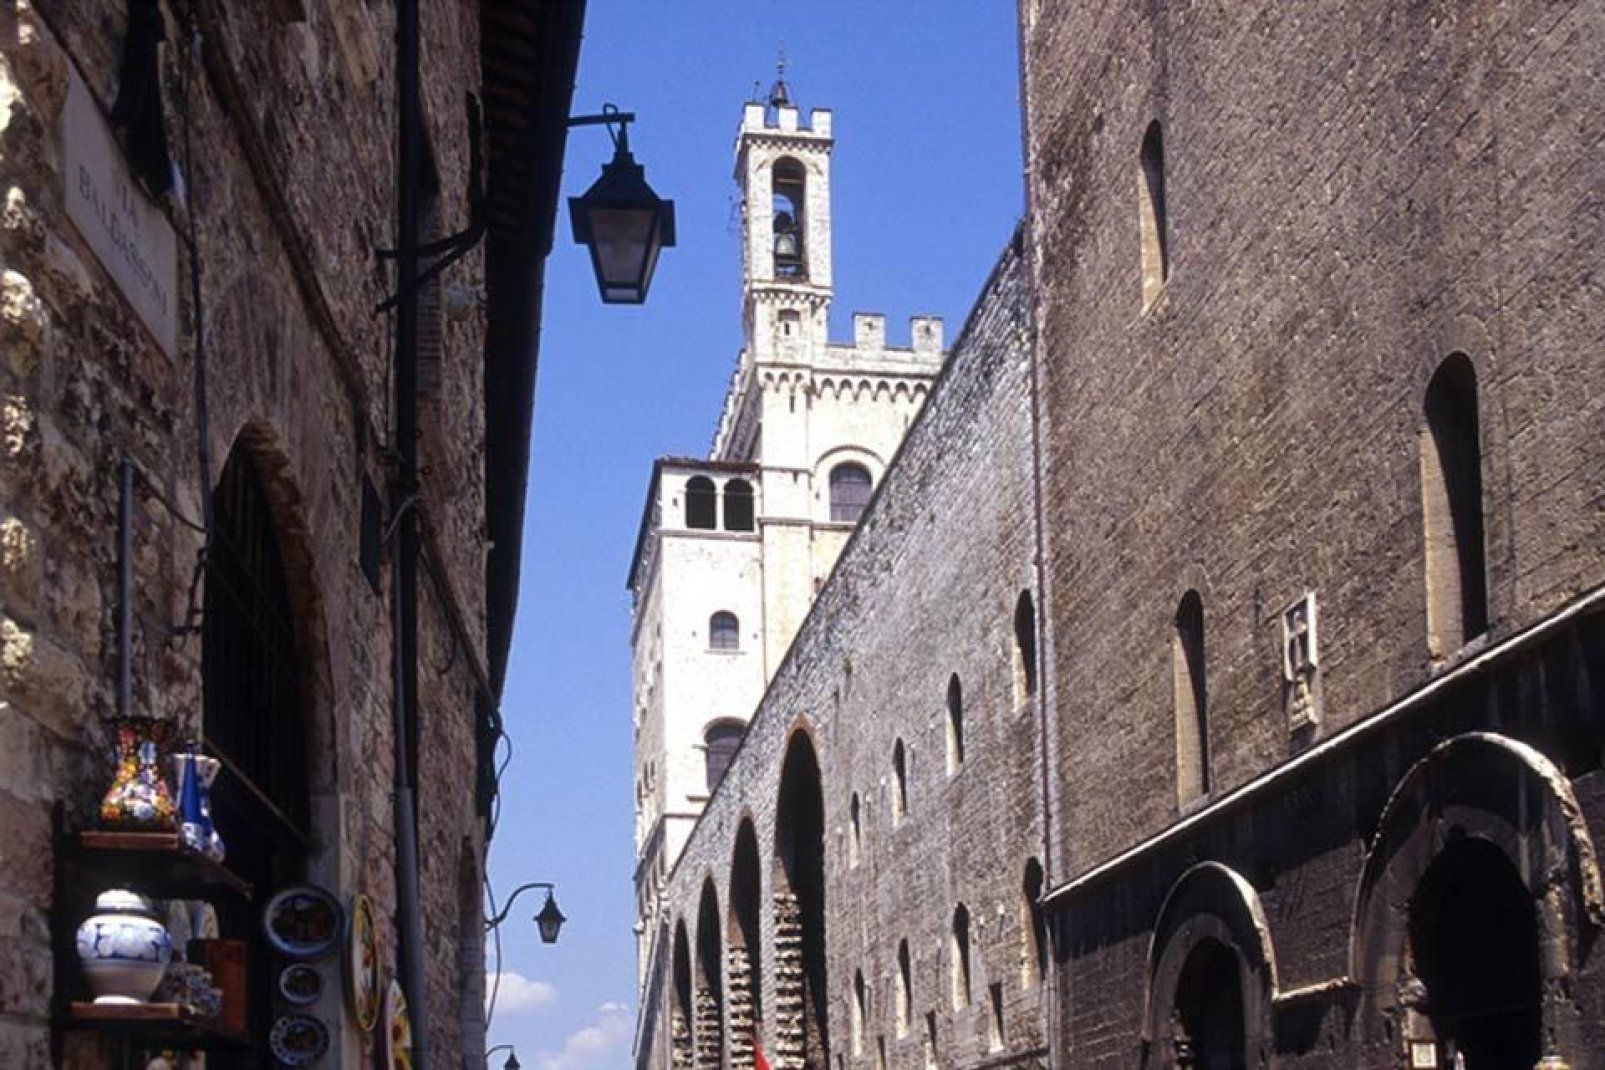 The Palazzo dei Consoli, built between 1332 and 1349, is one of the largest public buildings in Europe